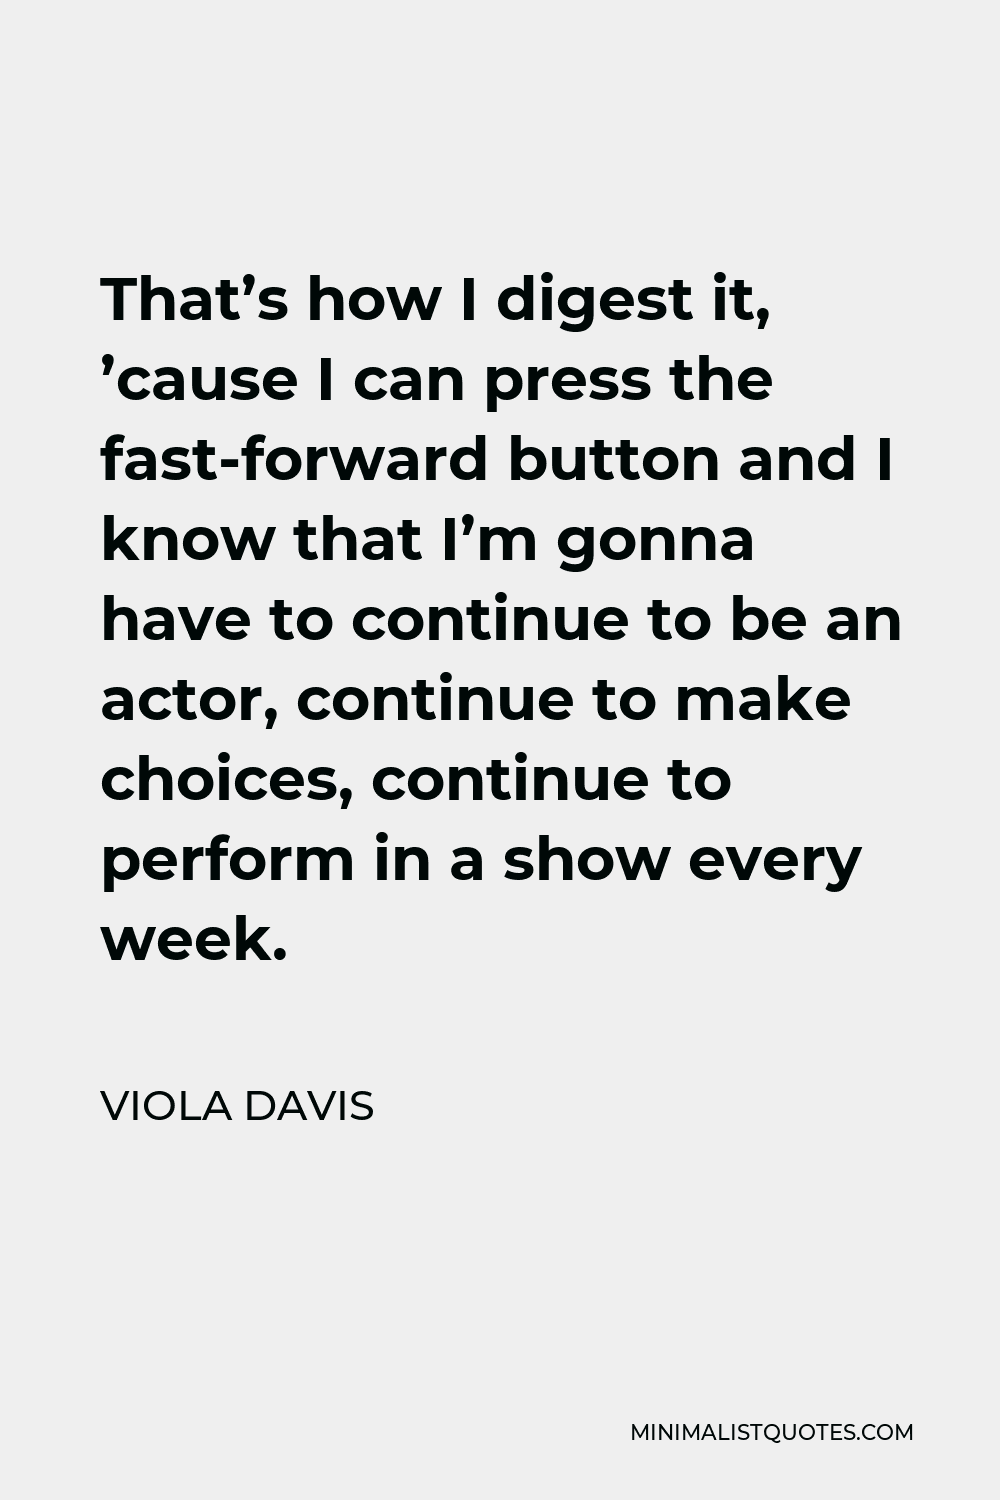 Viola Davis Quote - That’s how I digest it, ’cause I can press the fast-forward button and I know that I’m gonna have to continue to be an actor, continue to make choices, continue to perform in a show every week.